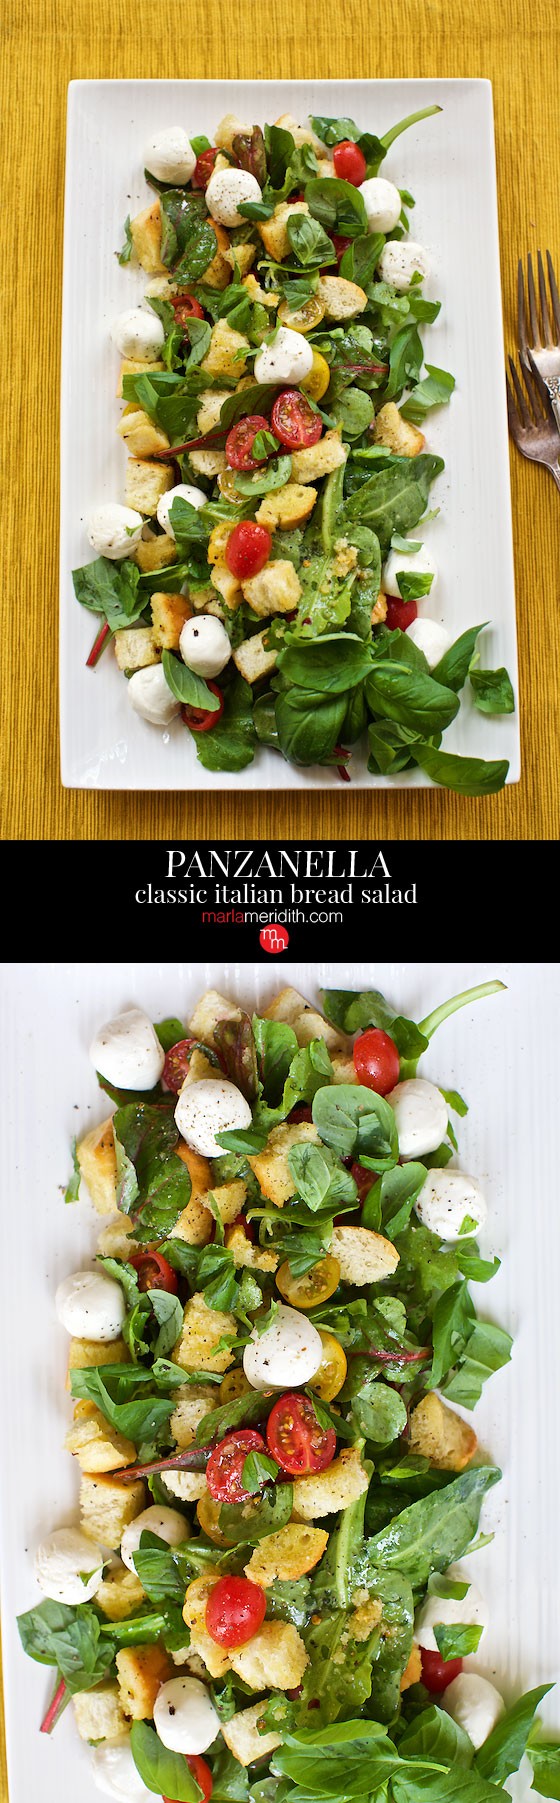 Panzanella {Classic Italian Bread Salad} You gotta try this today! MarlaMeridith.com ( @marlameridith )